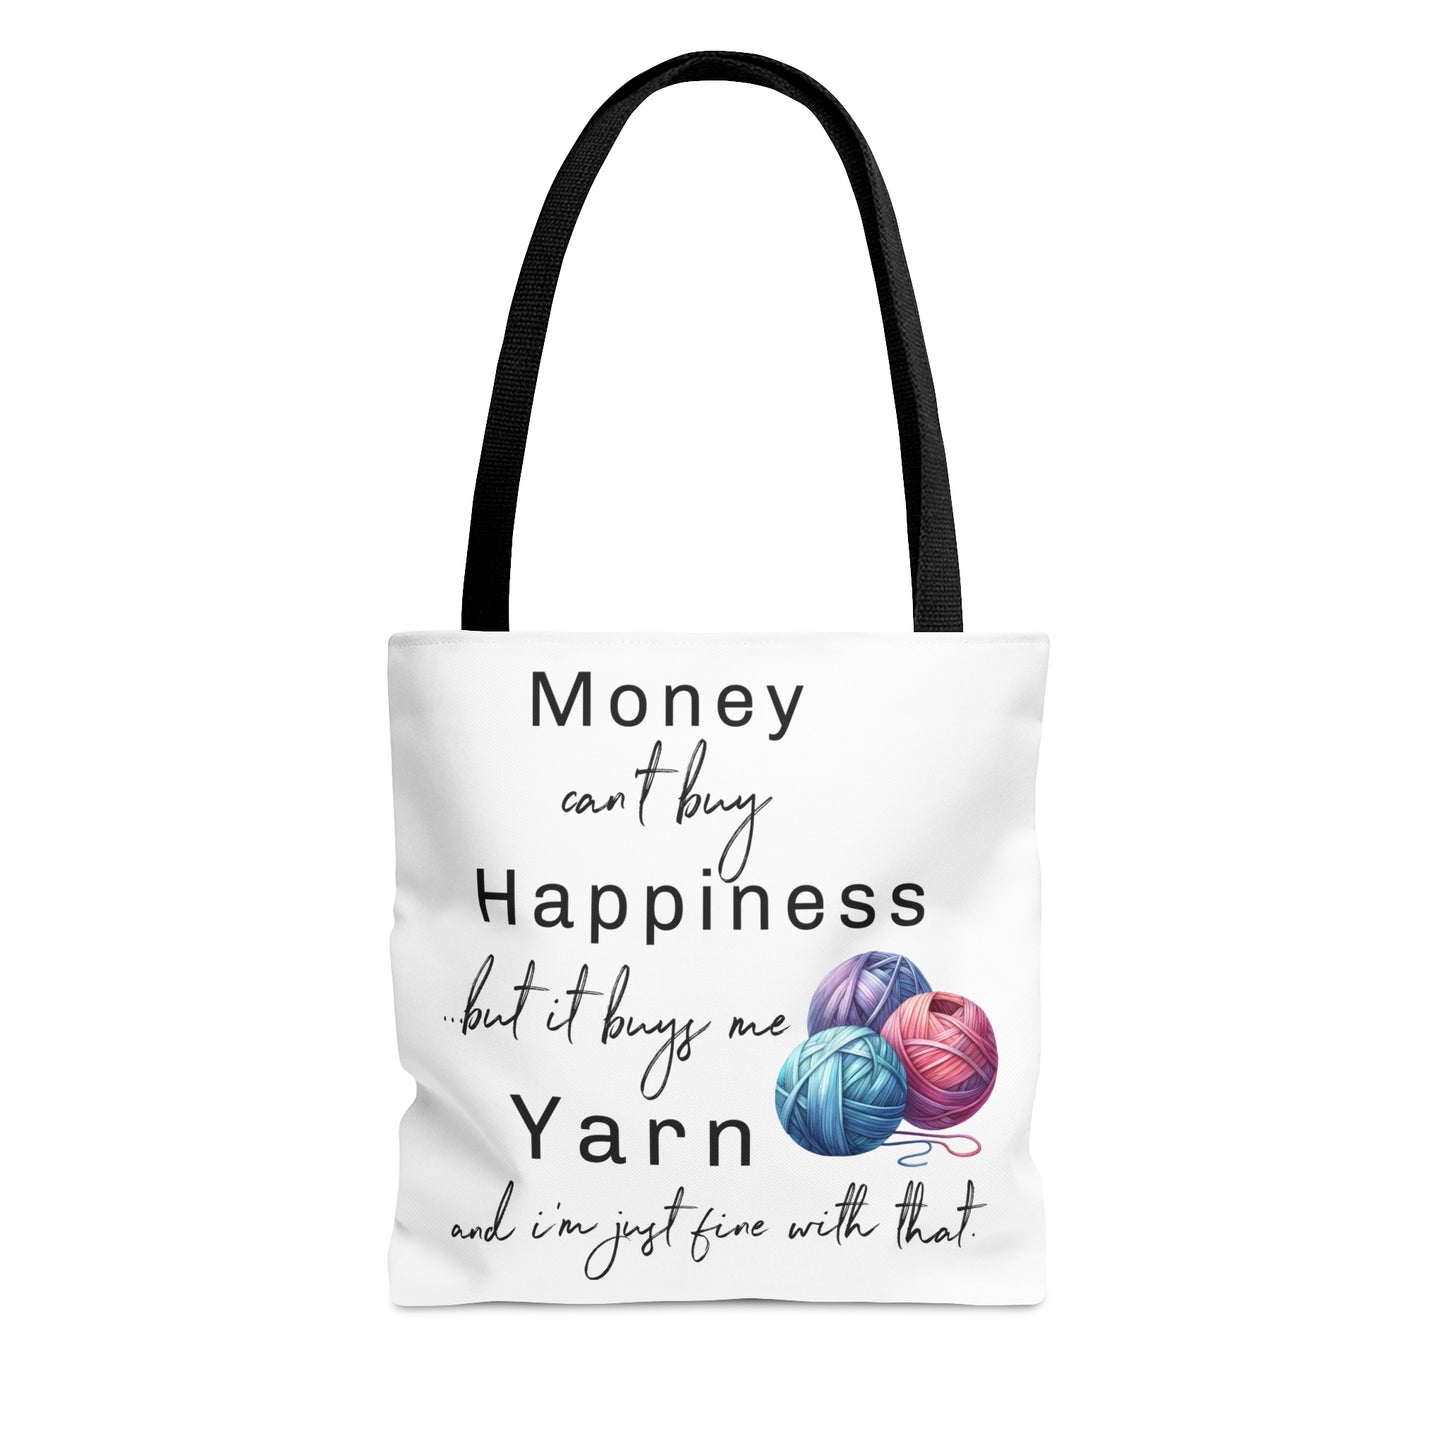 Bag for Yarn, Tote Bag for Knitter, Bag for Crochet Project, Gift for Yarn Lover, Project Bag, Money Can't Buy Happiness Bag, Funny Yarn Bag